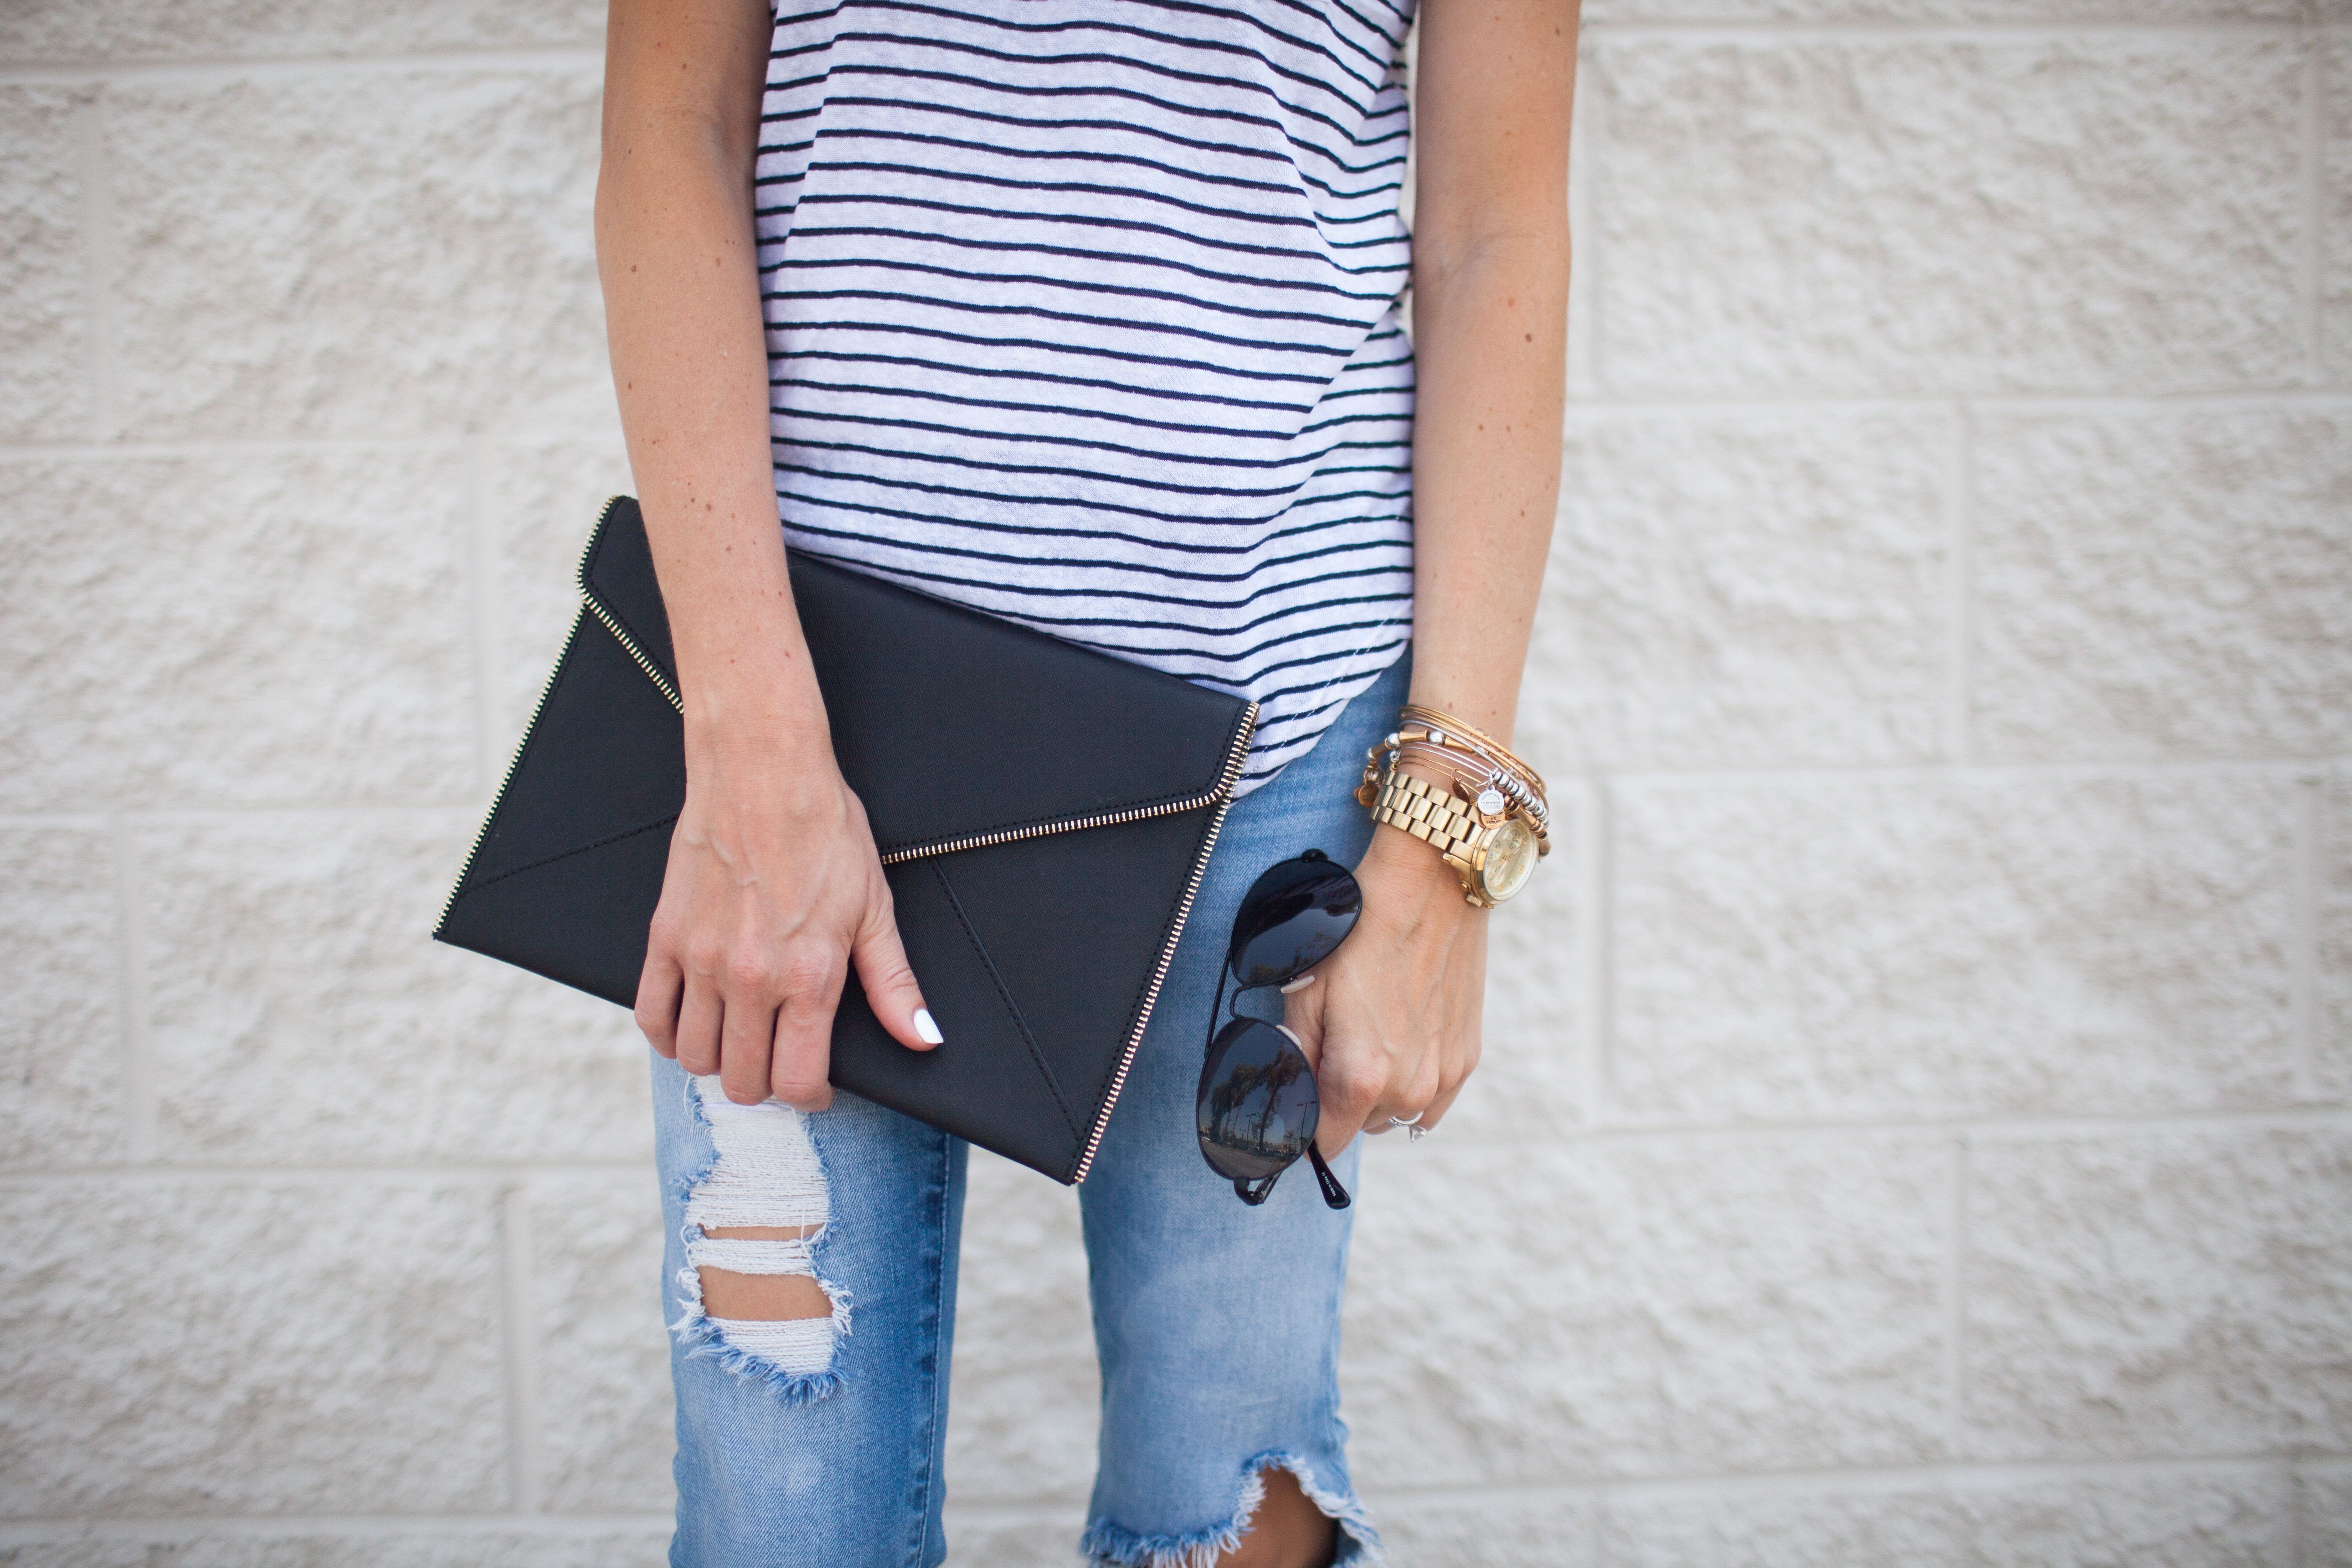 Kailee-wright-striped-tshirt-nordstrom